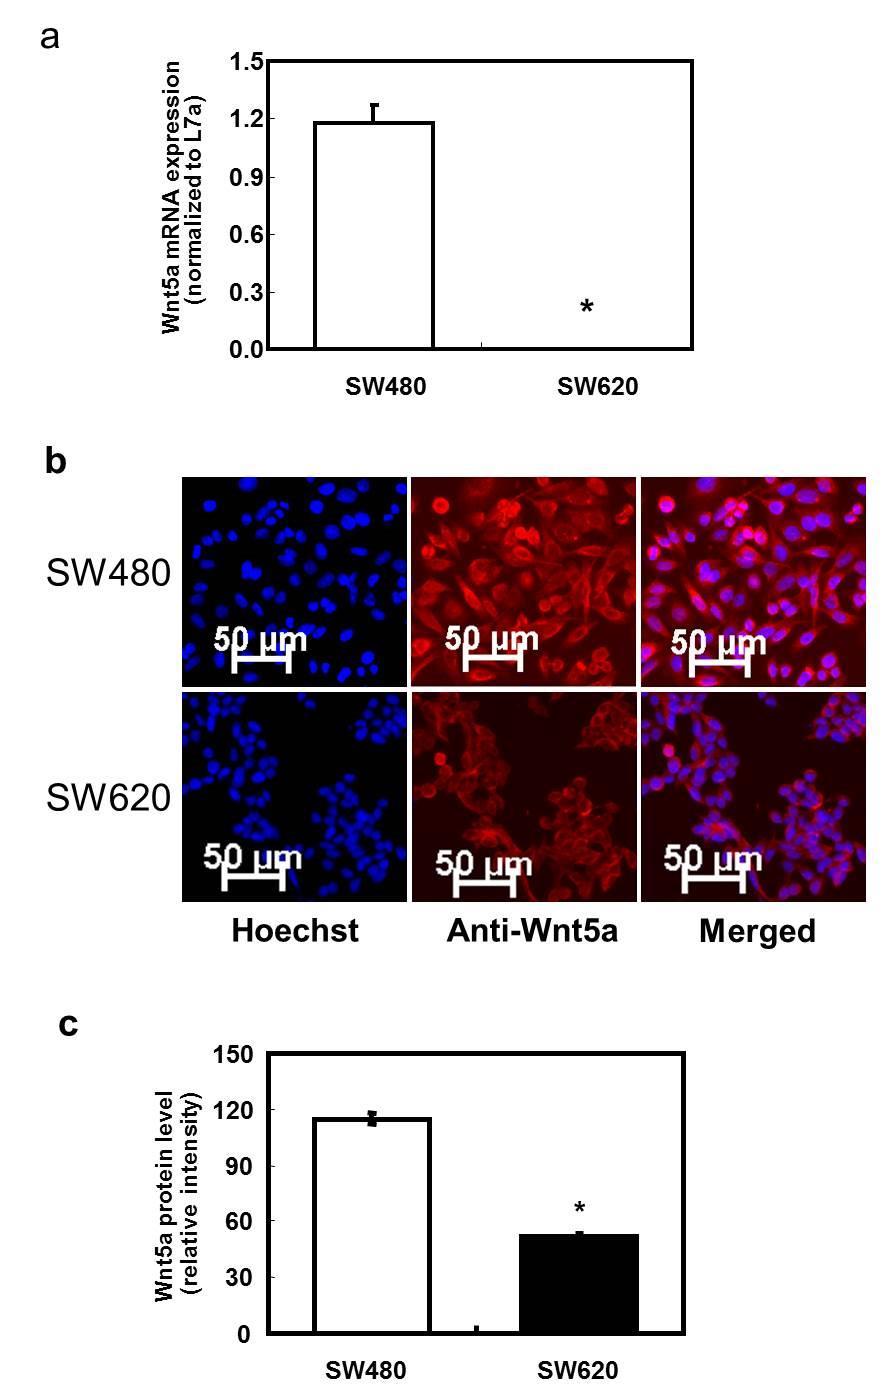 Figure 4.1 Protein and mrna expression of Wnt5a in non-metastatic human colon cancer cell line SW480 and highly metastatic cell line SW620. a. Relative mrna expression of Wnt5a in SW480 and SW620 presented as the ratio to the L7a housekeeping gene (n=3).